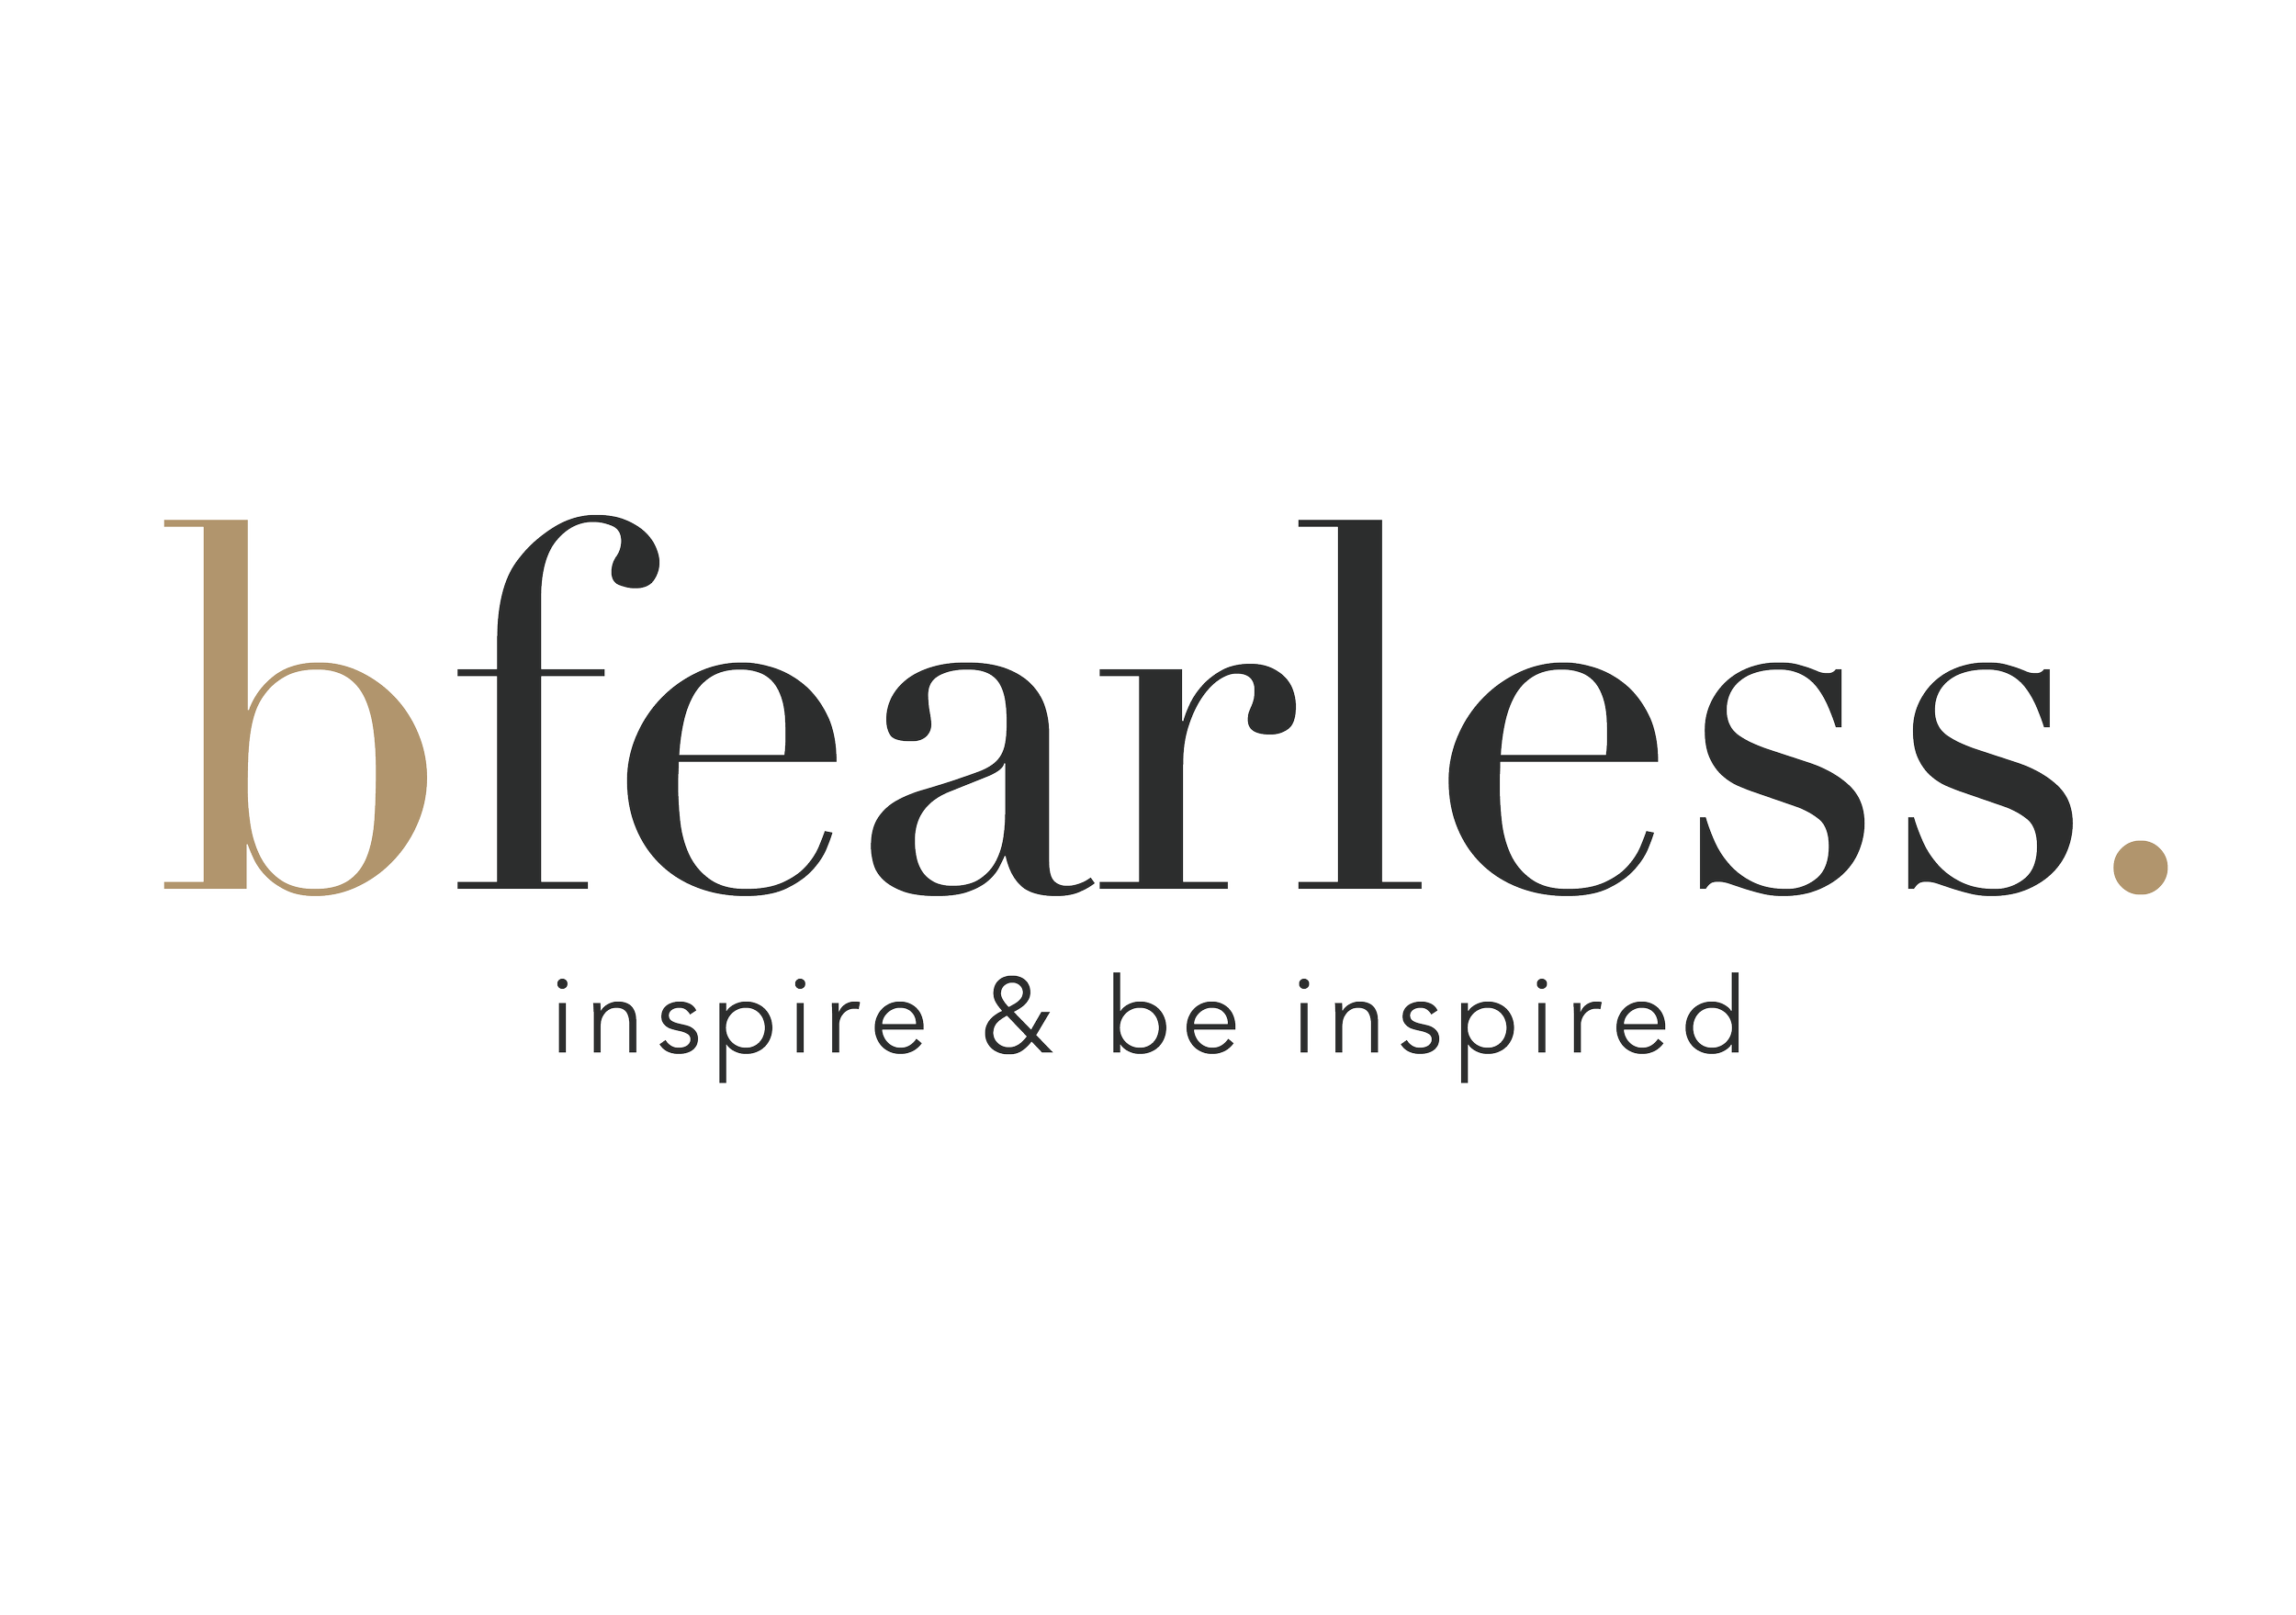 bfearless. INSPIRE & BE INSPIRED